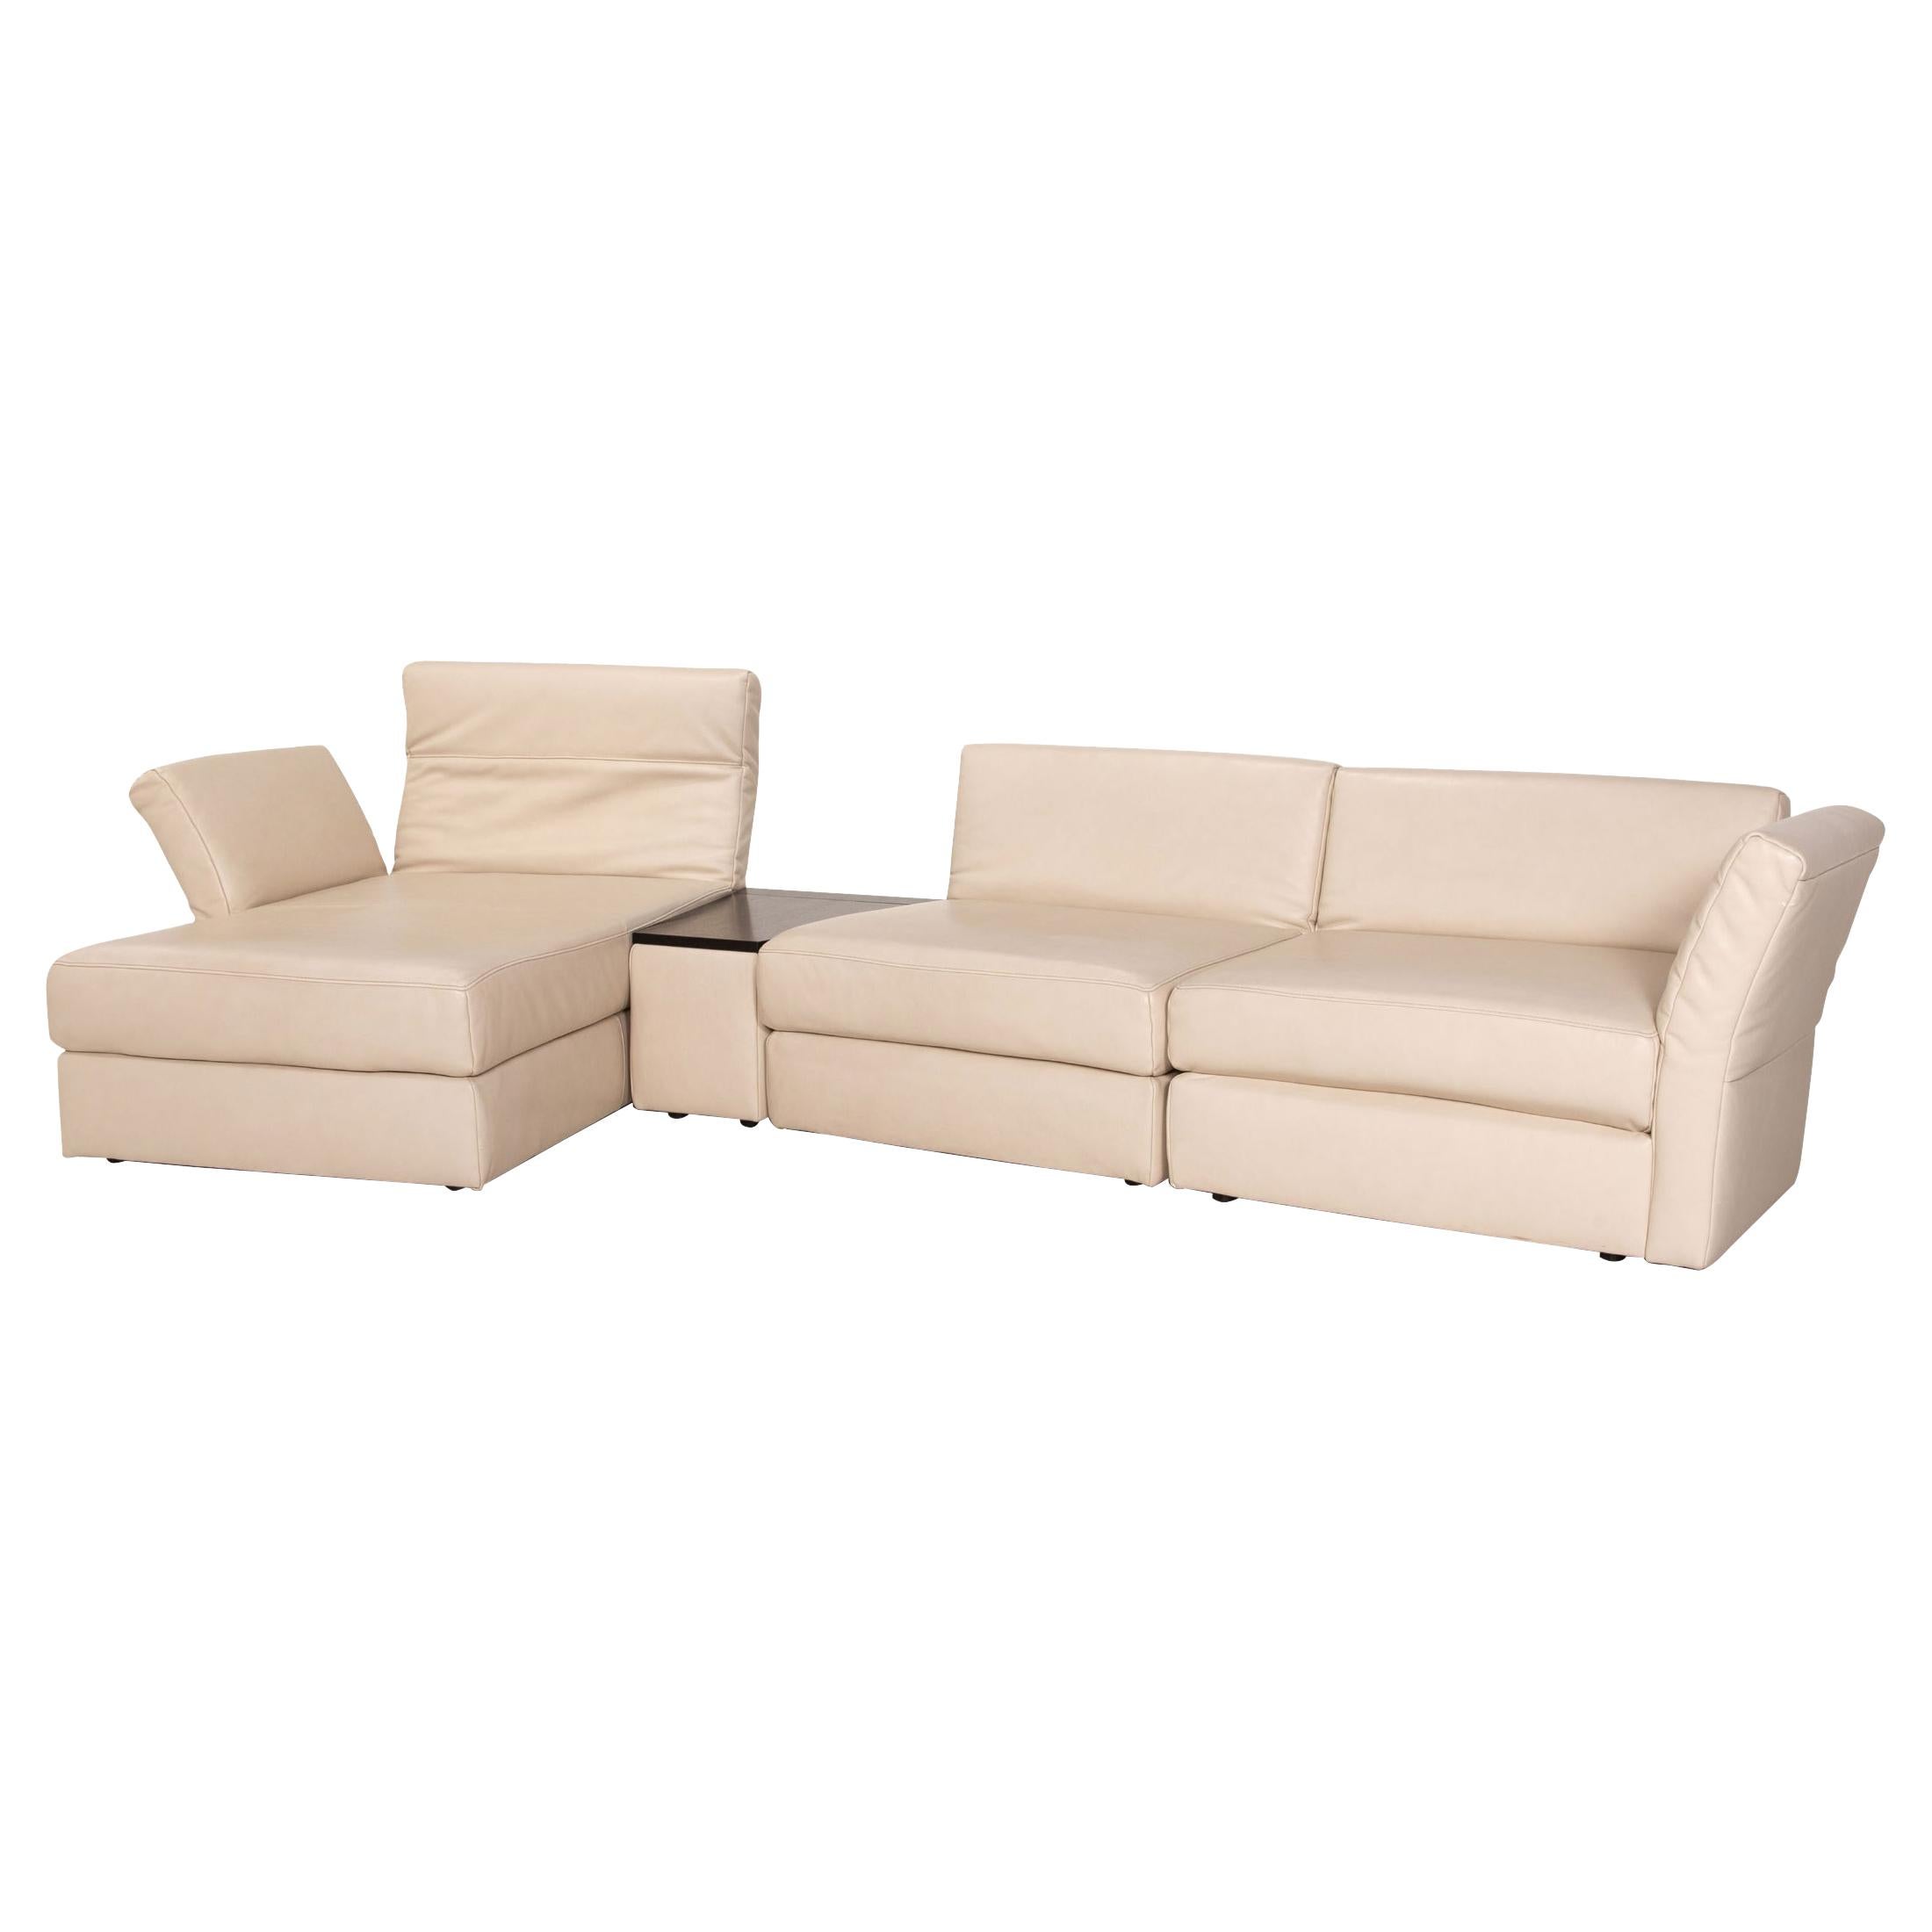 Koinor Avanti Leather Corner Sofa Beige Sofa Couch Function For Sale